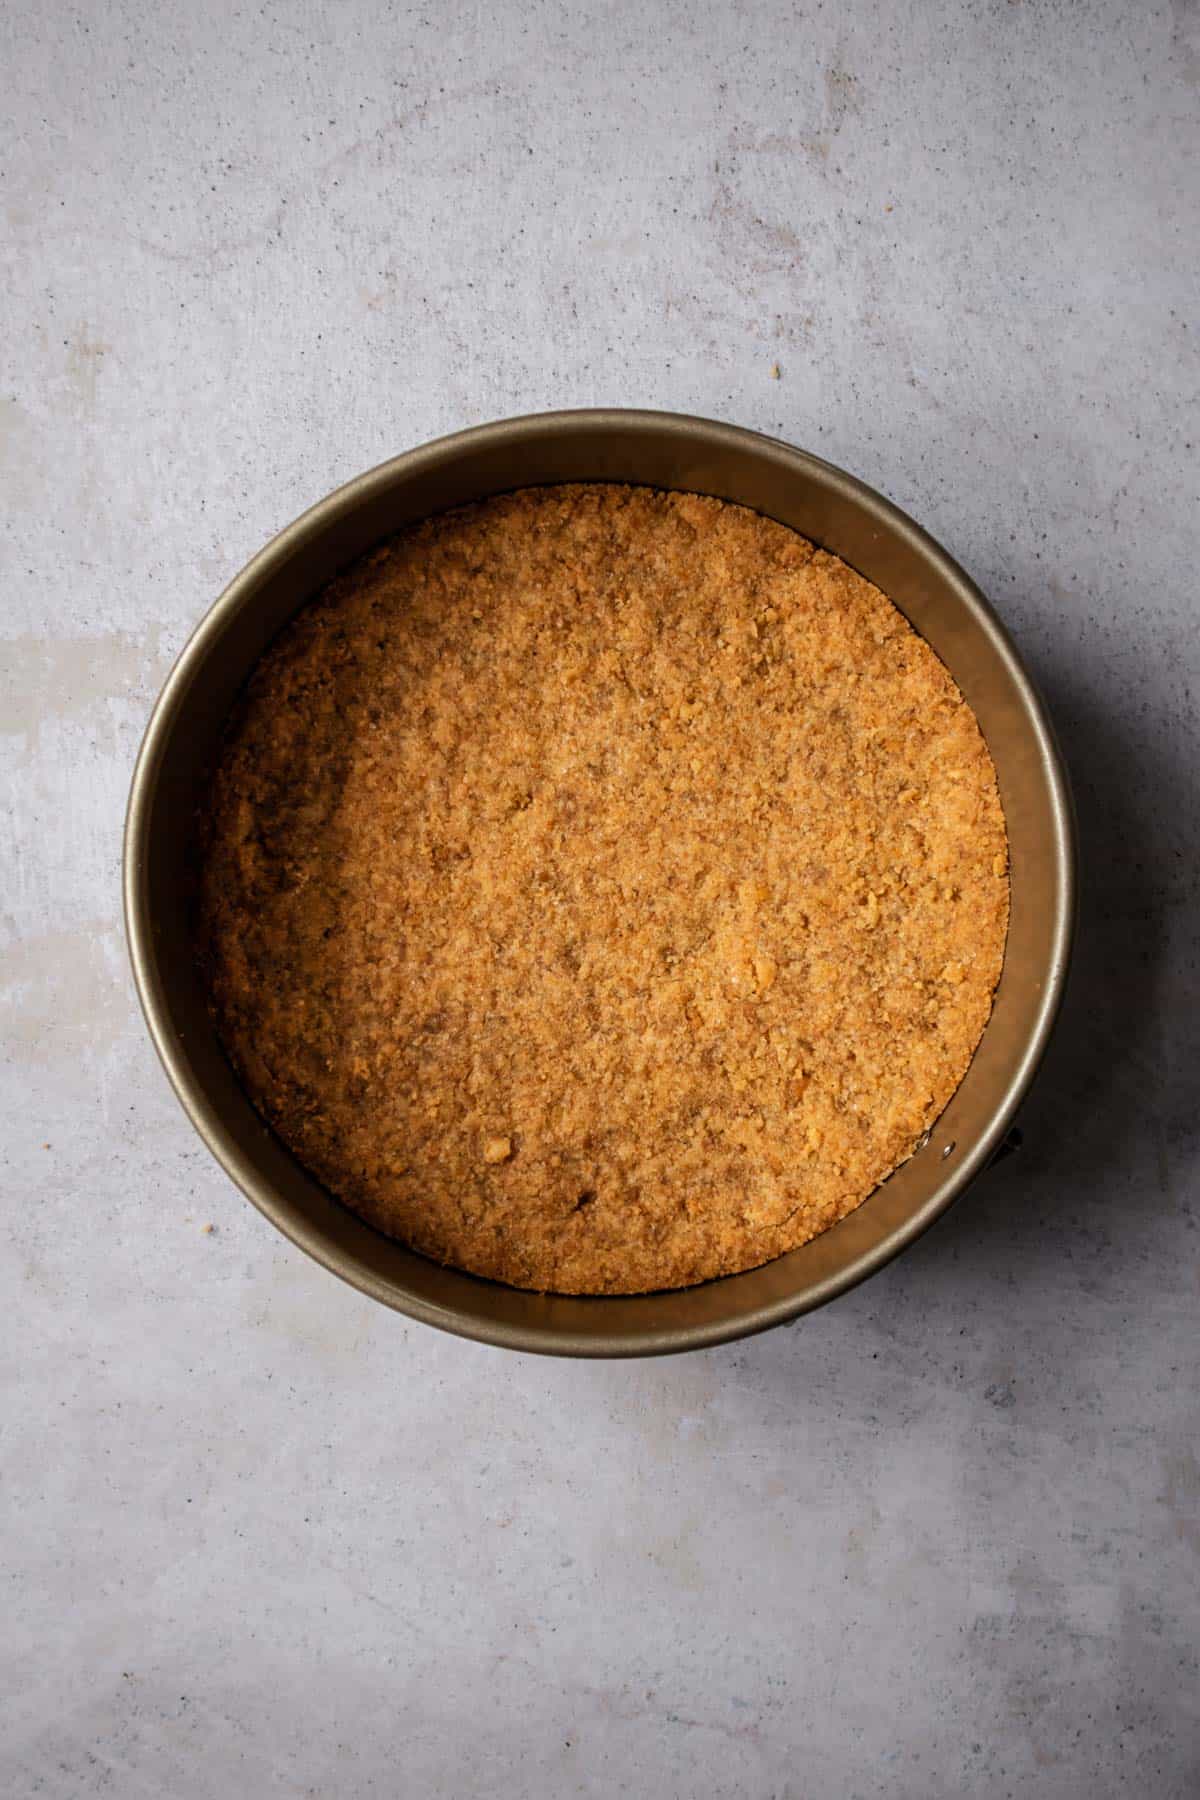 Graham cracker crust in the bottom of a cake pan